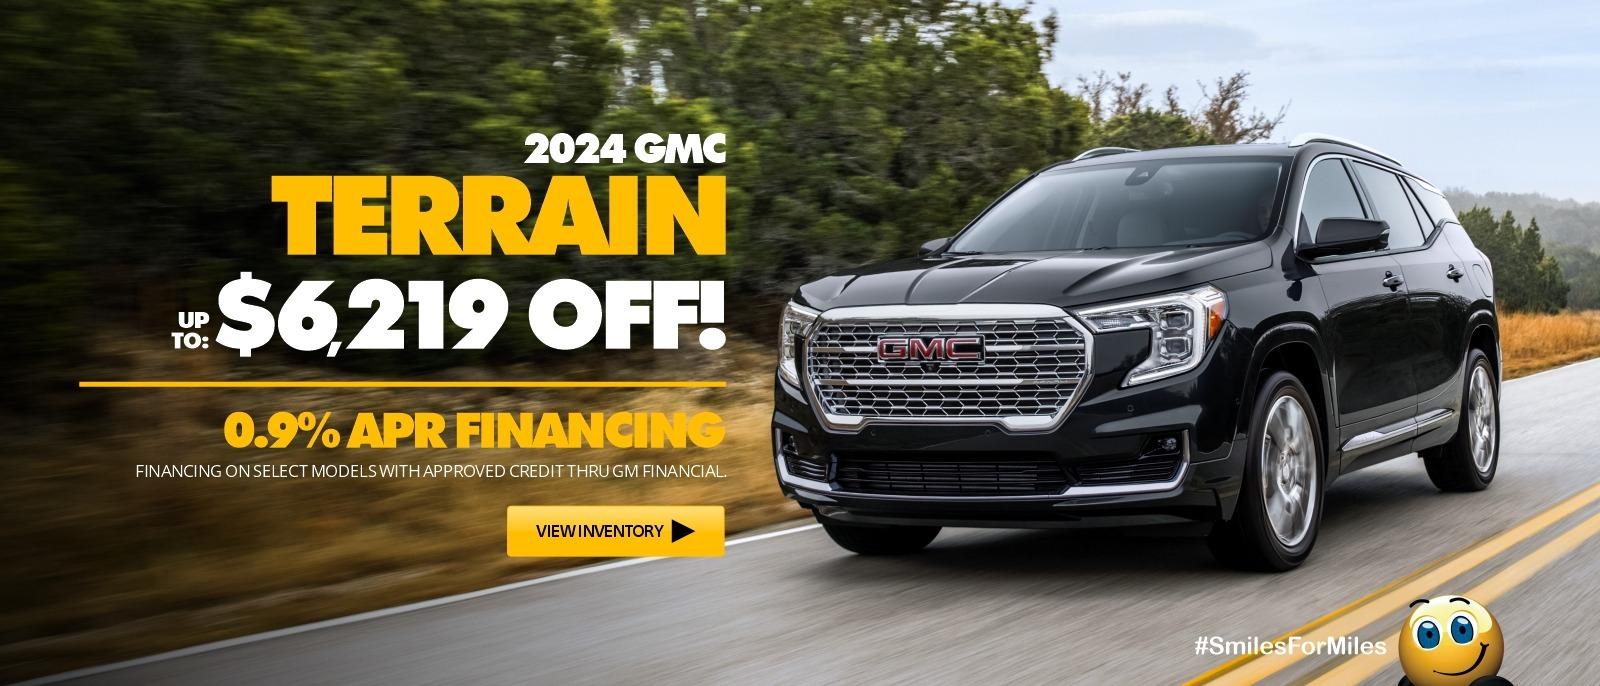 2024 GMC Terrain - SAVE UP TO $6,219 OFF MSRP | 0.9% APR